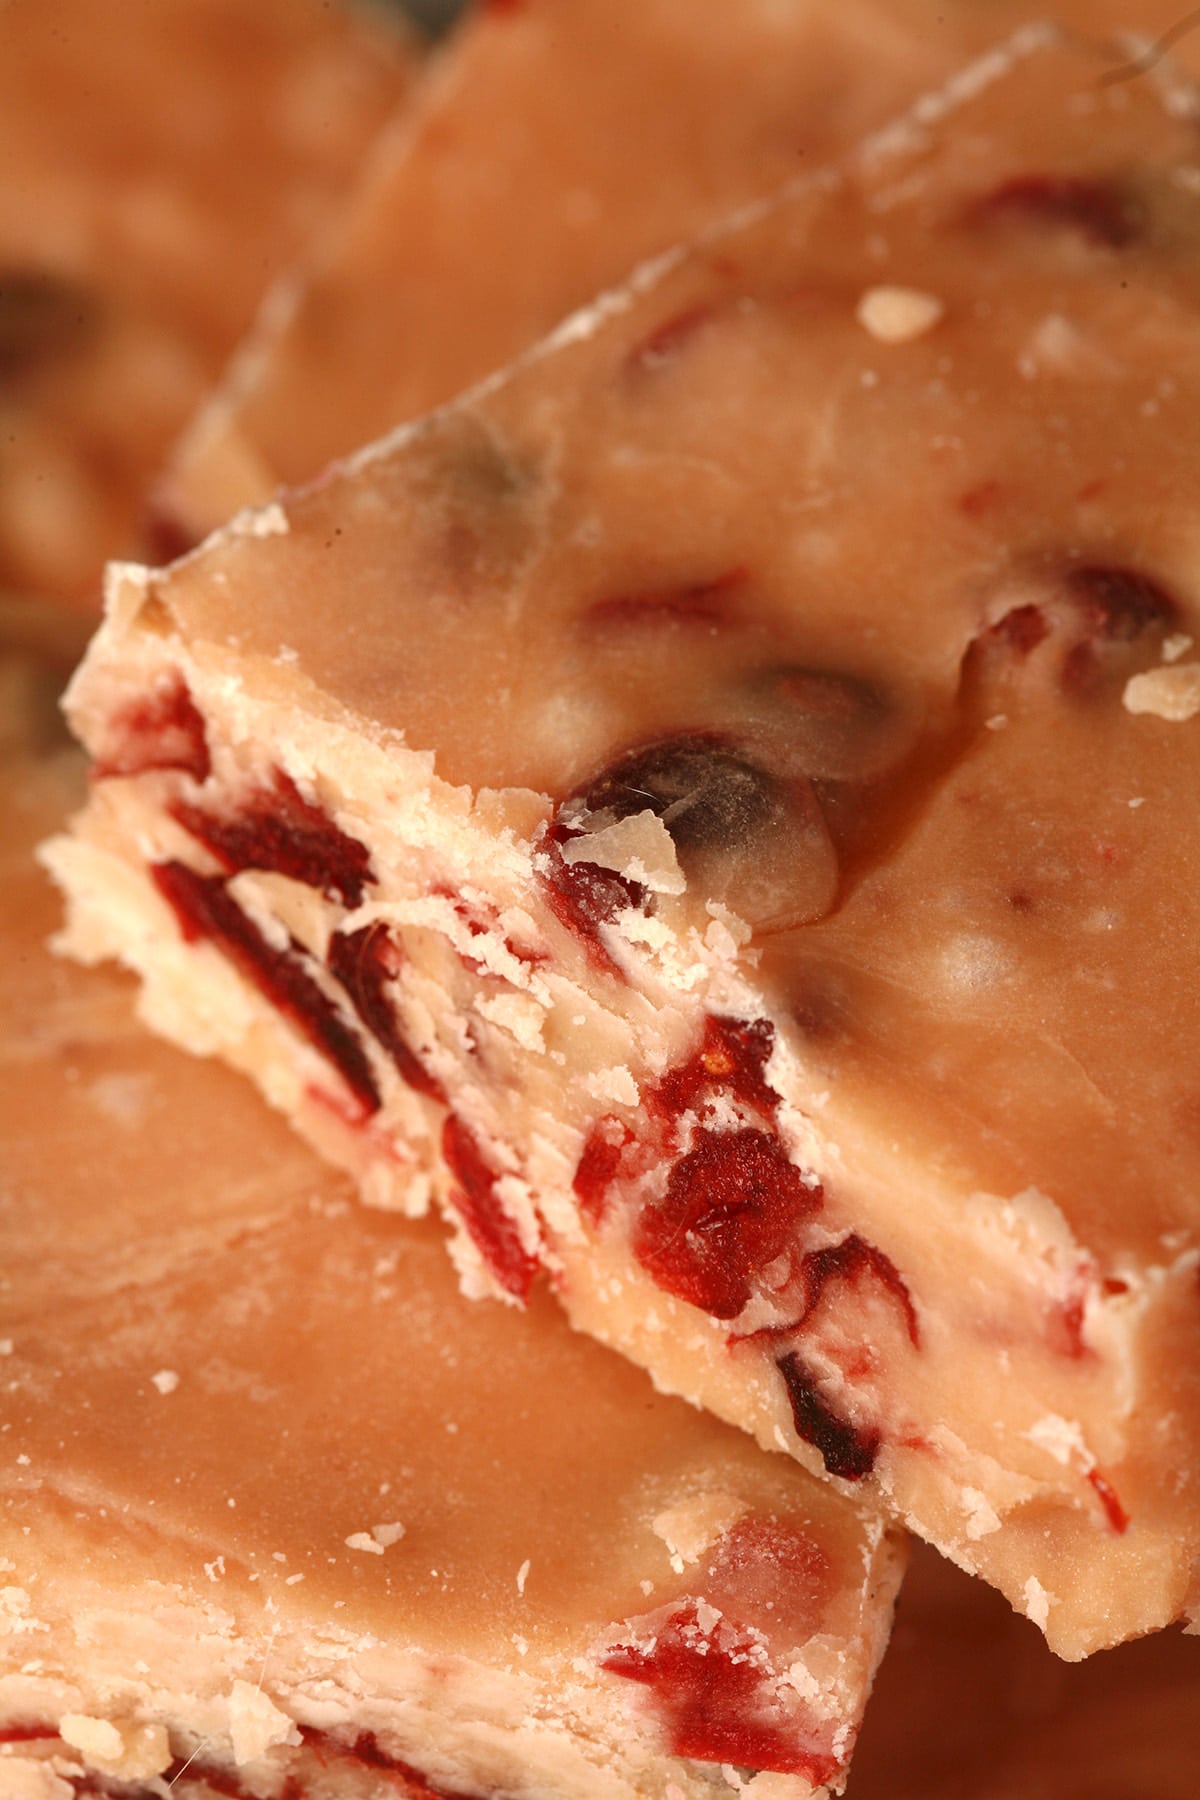 A plate of traditional style orange cranberry fudge.